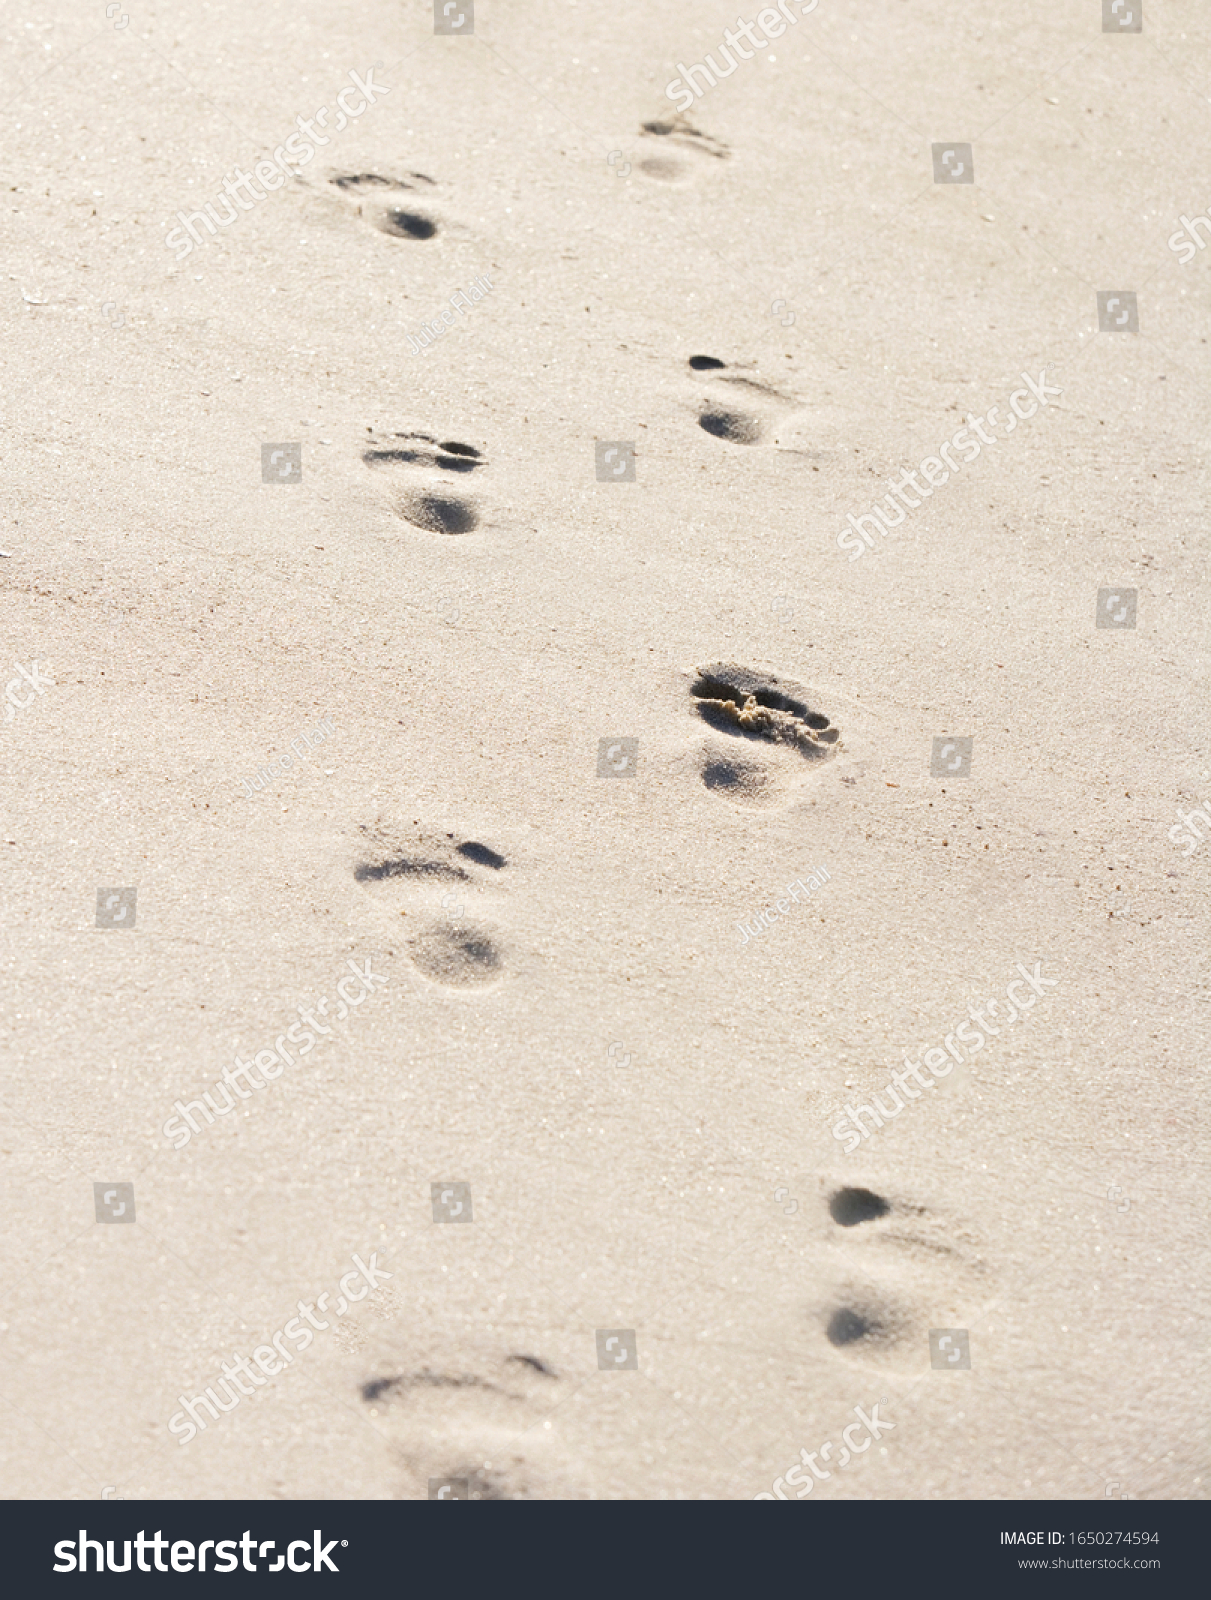 Footsteps in sand on a sunny day #1650274594